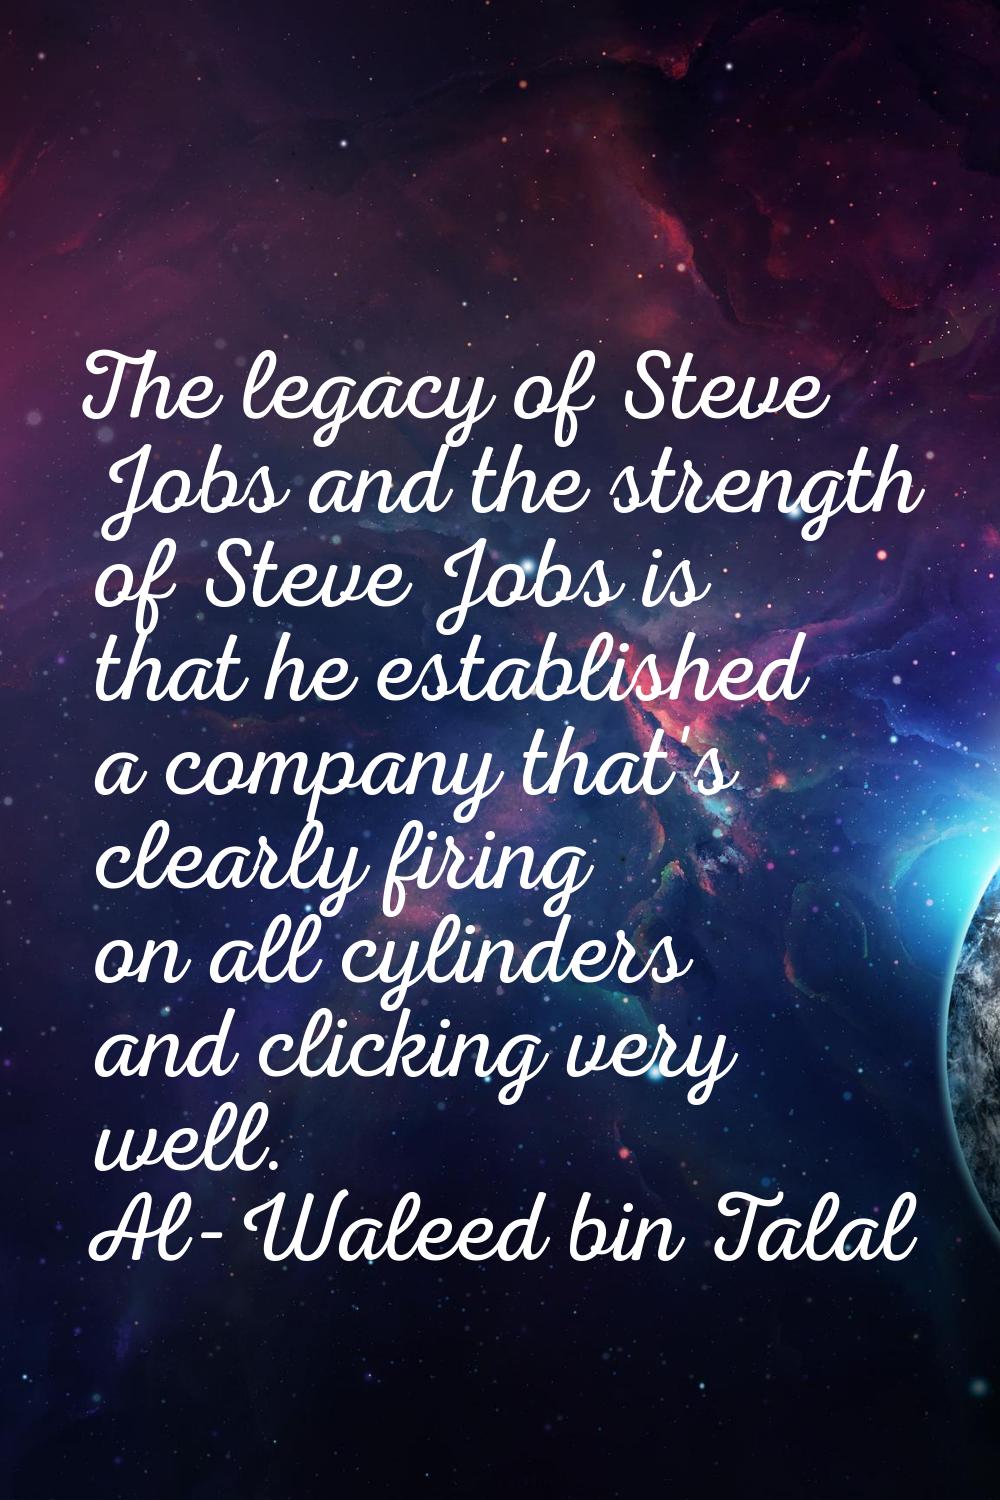 The legacy of Steve Jobs and the strength of Steve Jobs is that he established a company that's cle